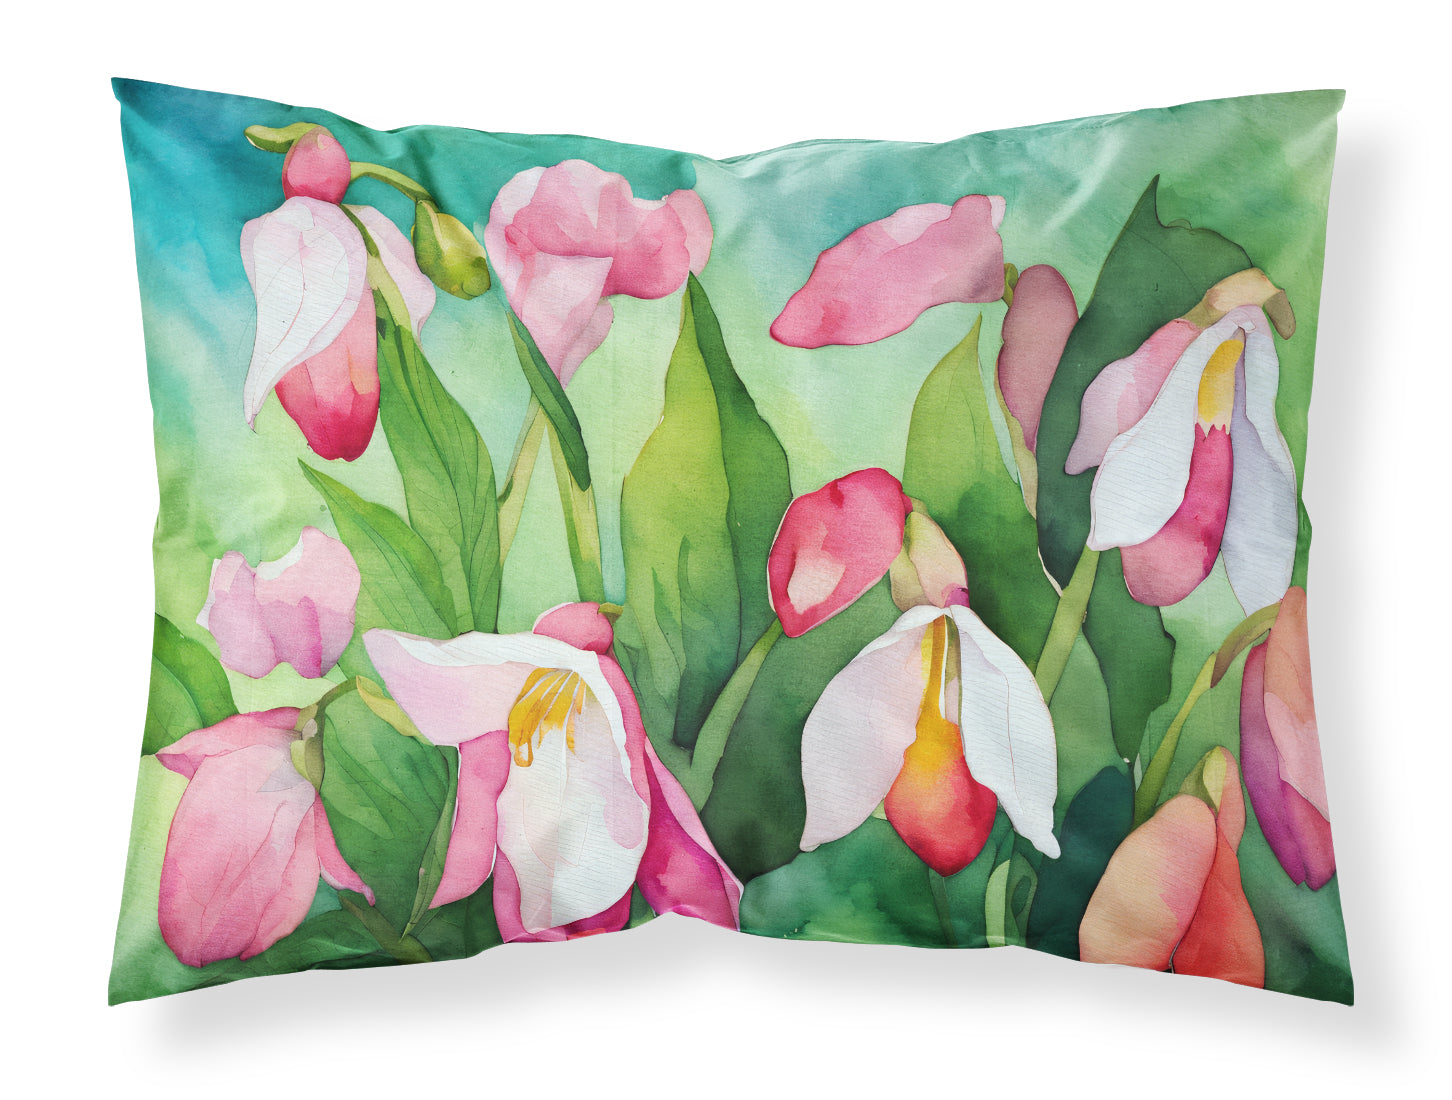 Buy this Minnesota Pink and White Lady’s Slippers in Watercolor Fabric Standard Pillowcase